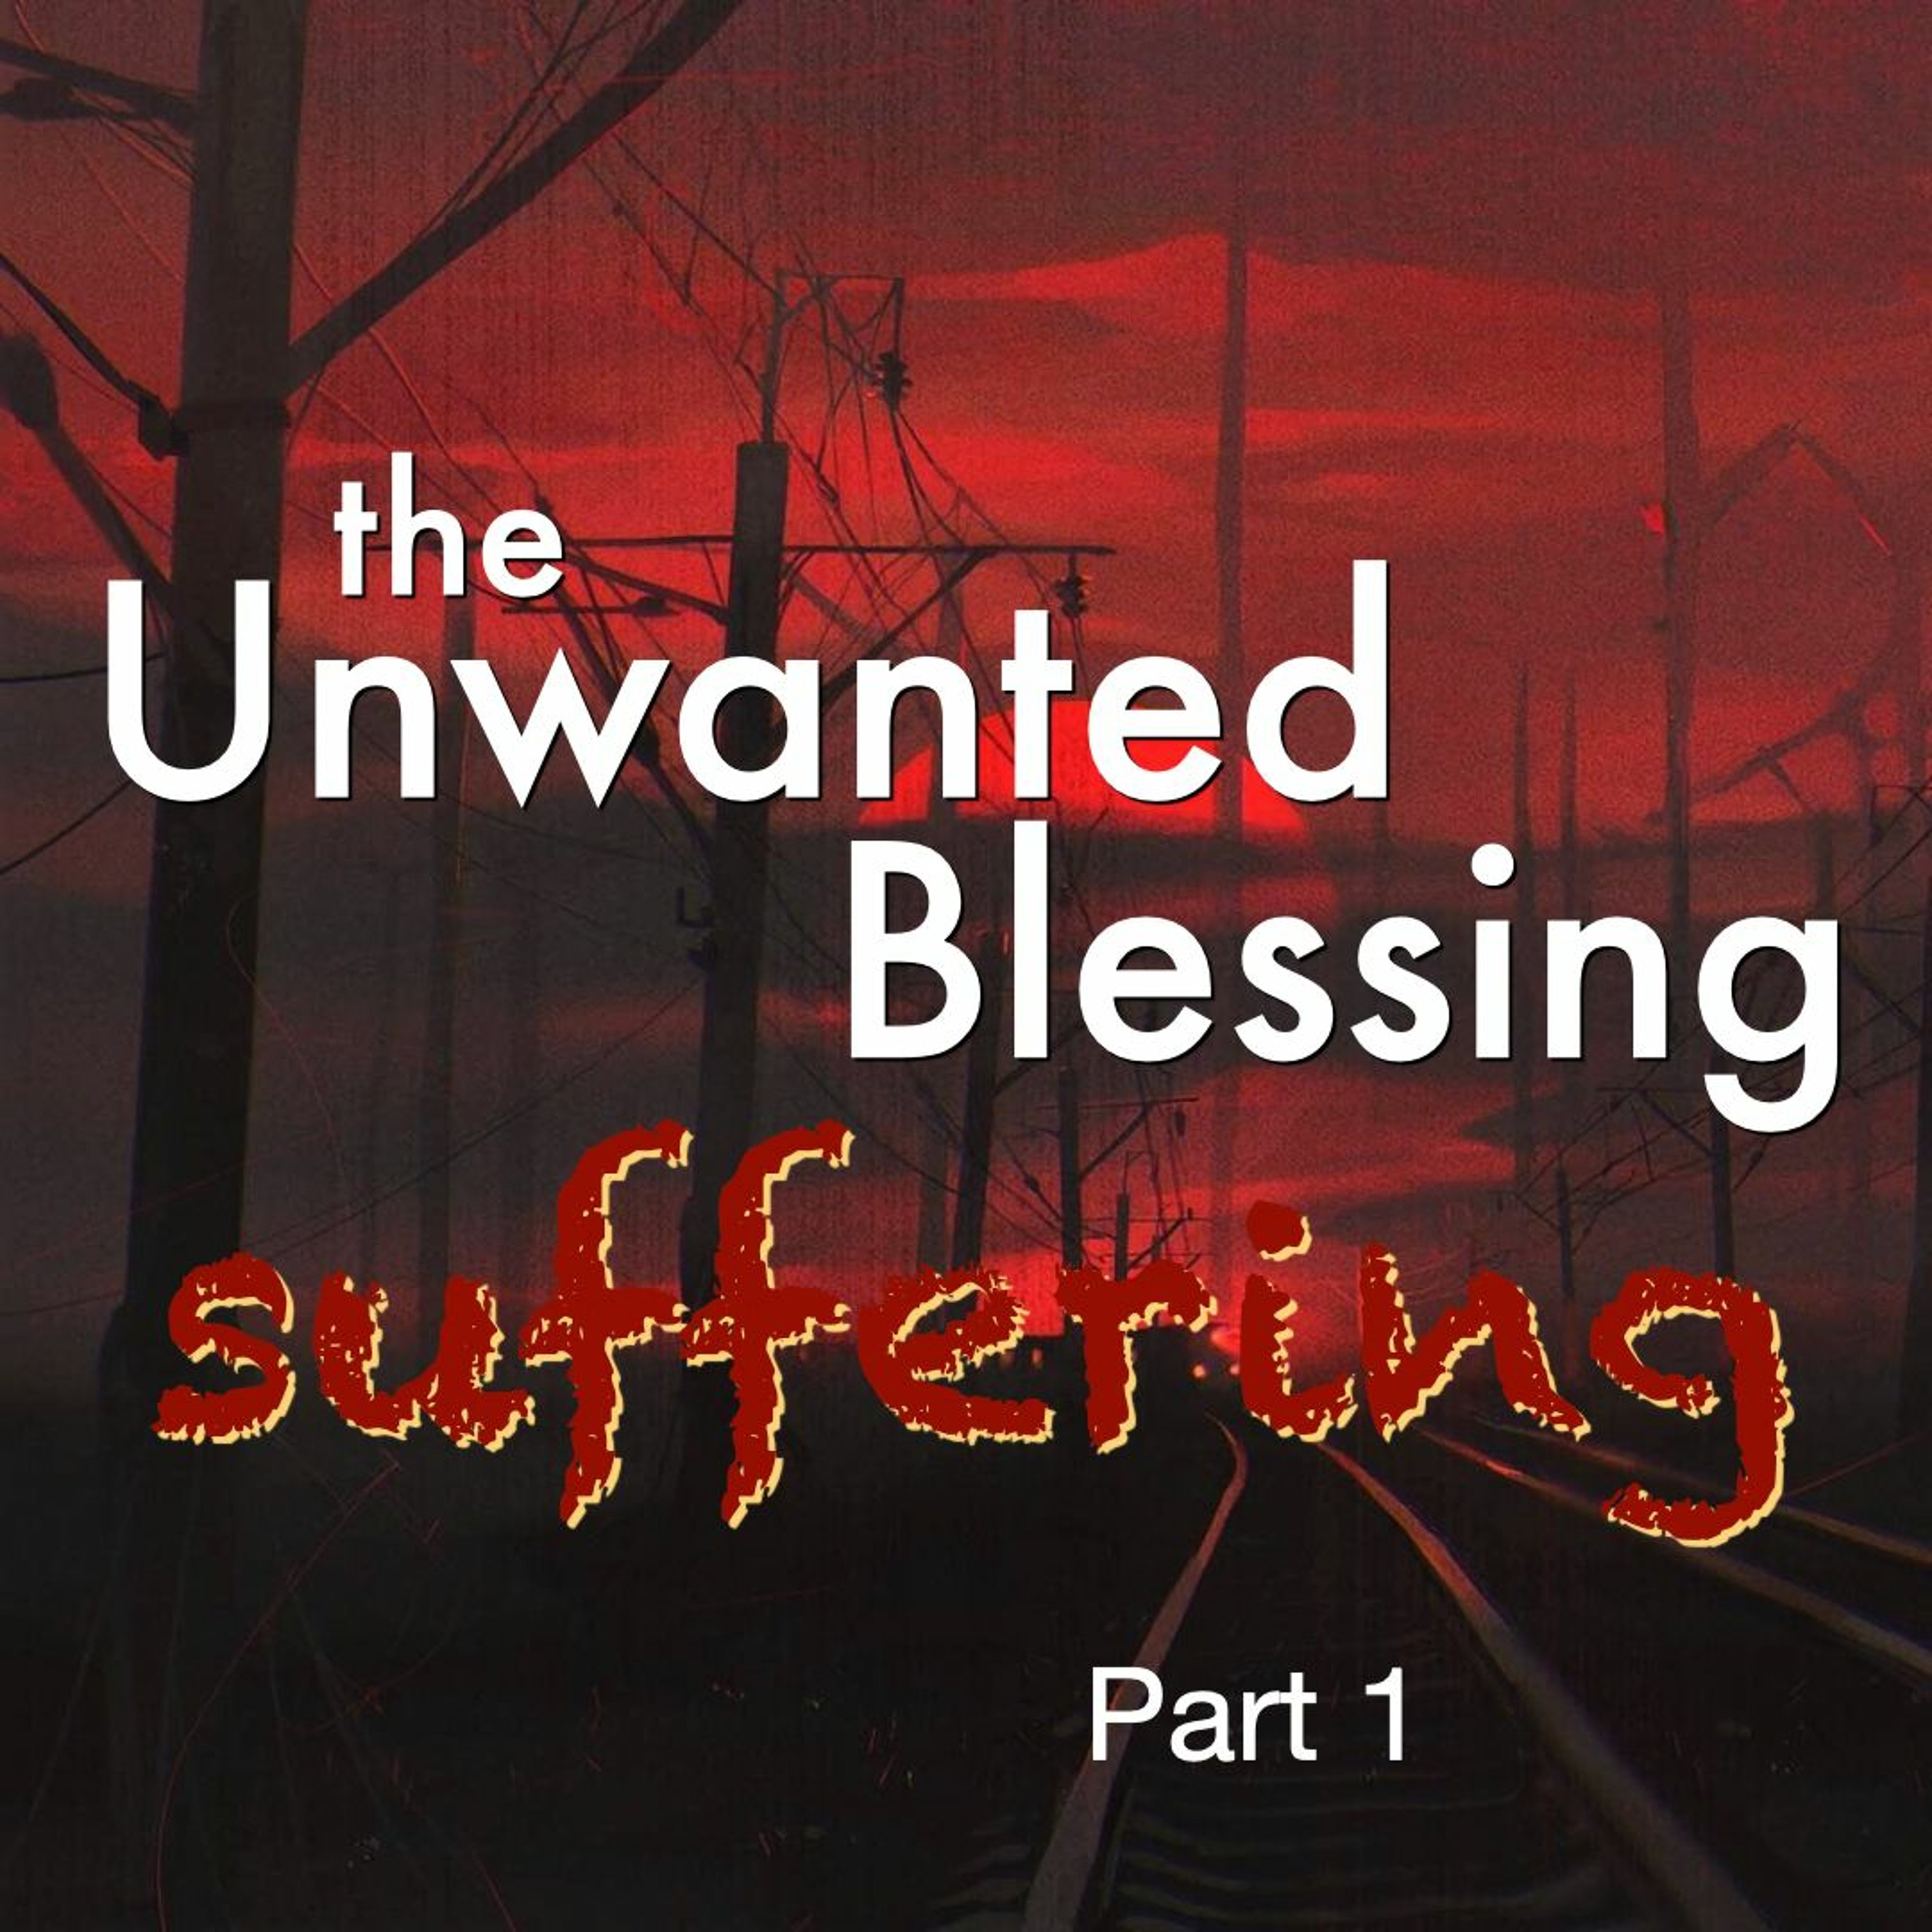 5-17-20 The Unwanted Blessing - Suffering As A Christian